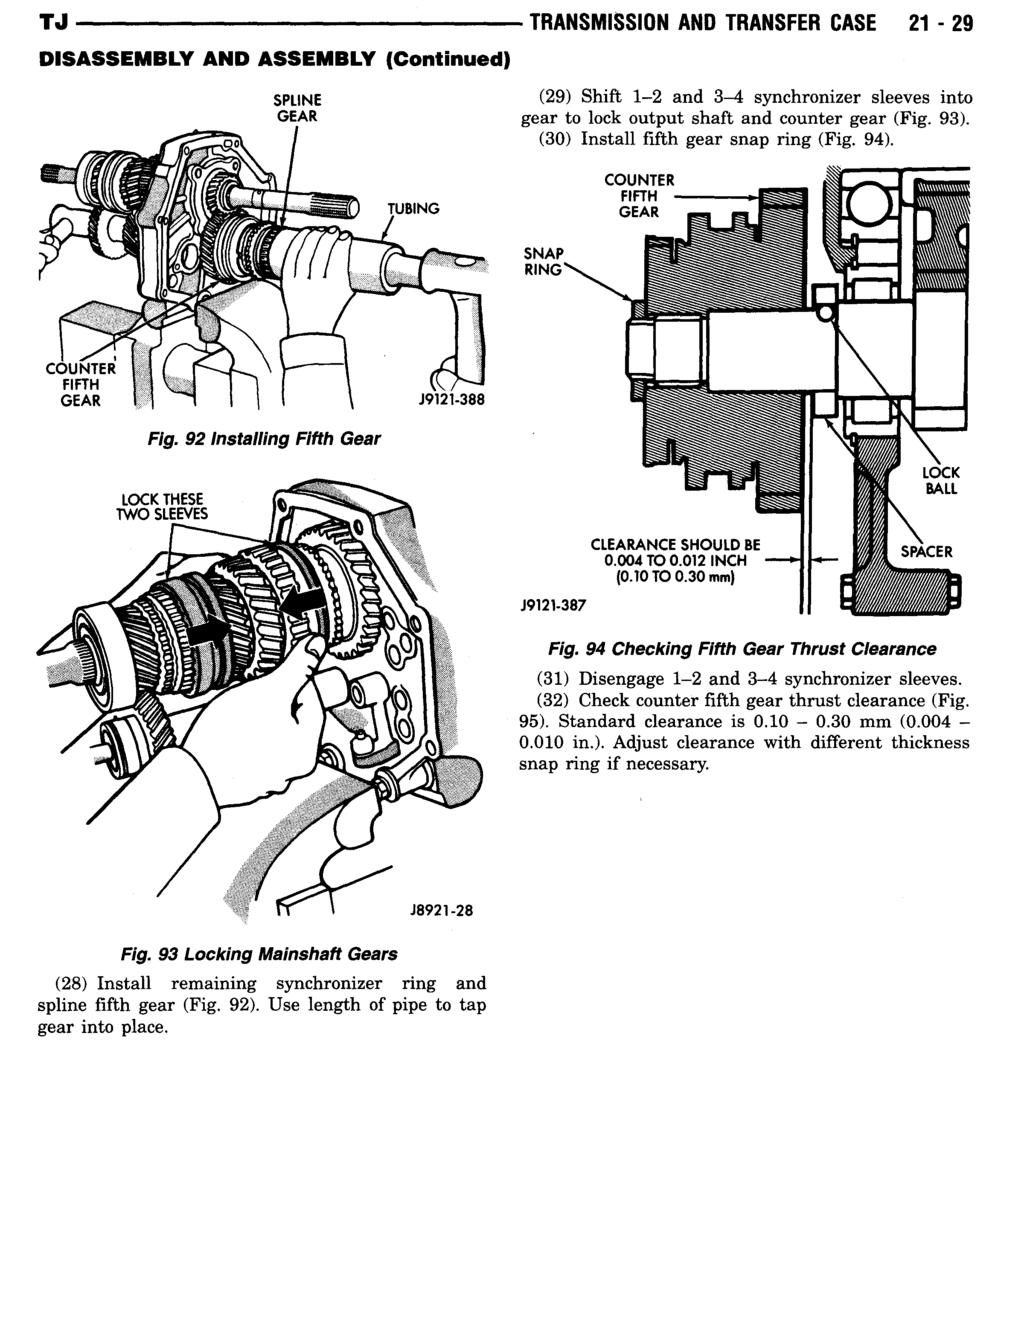 SPLINE GEAR TRANSMISSION AND TRANSFER CASE 21-29 (29) Shift 1-2 and 3-4 synchronizer sleeves into gear to lock output shaft and counter gear (Fig. 93). (30) Install fifth gear snap ring ( 94).